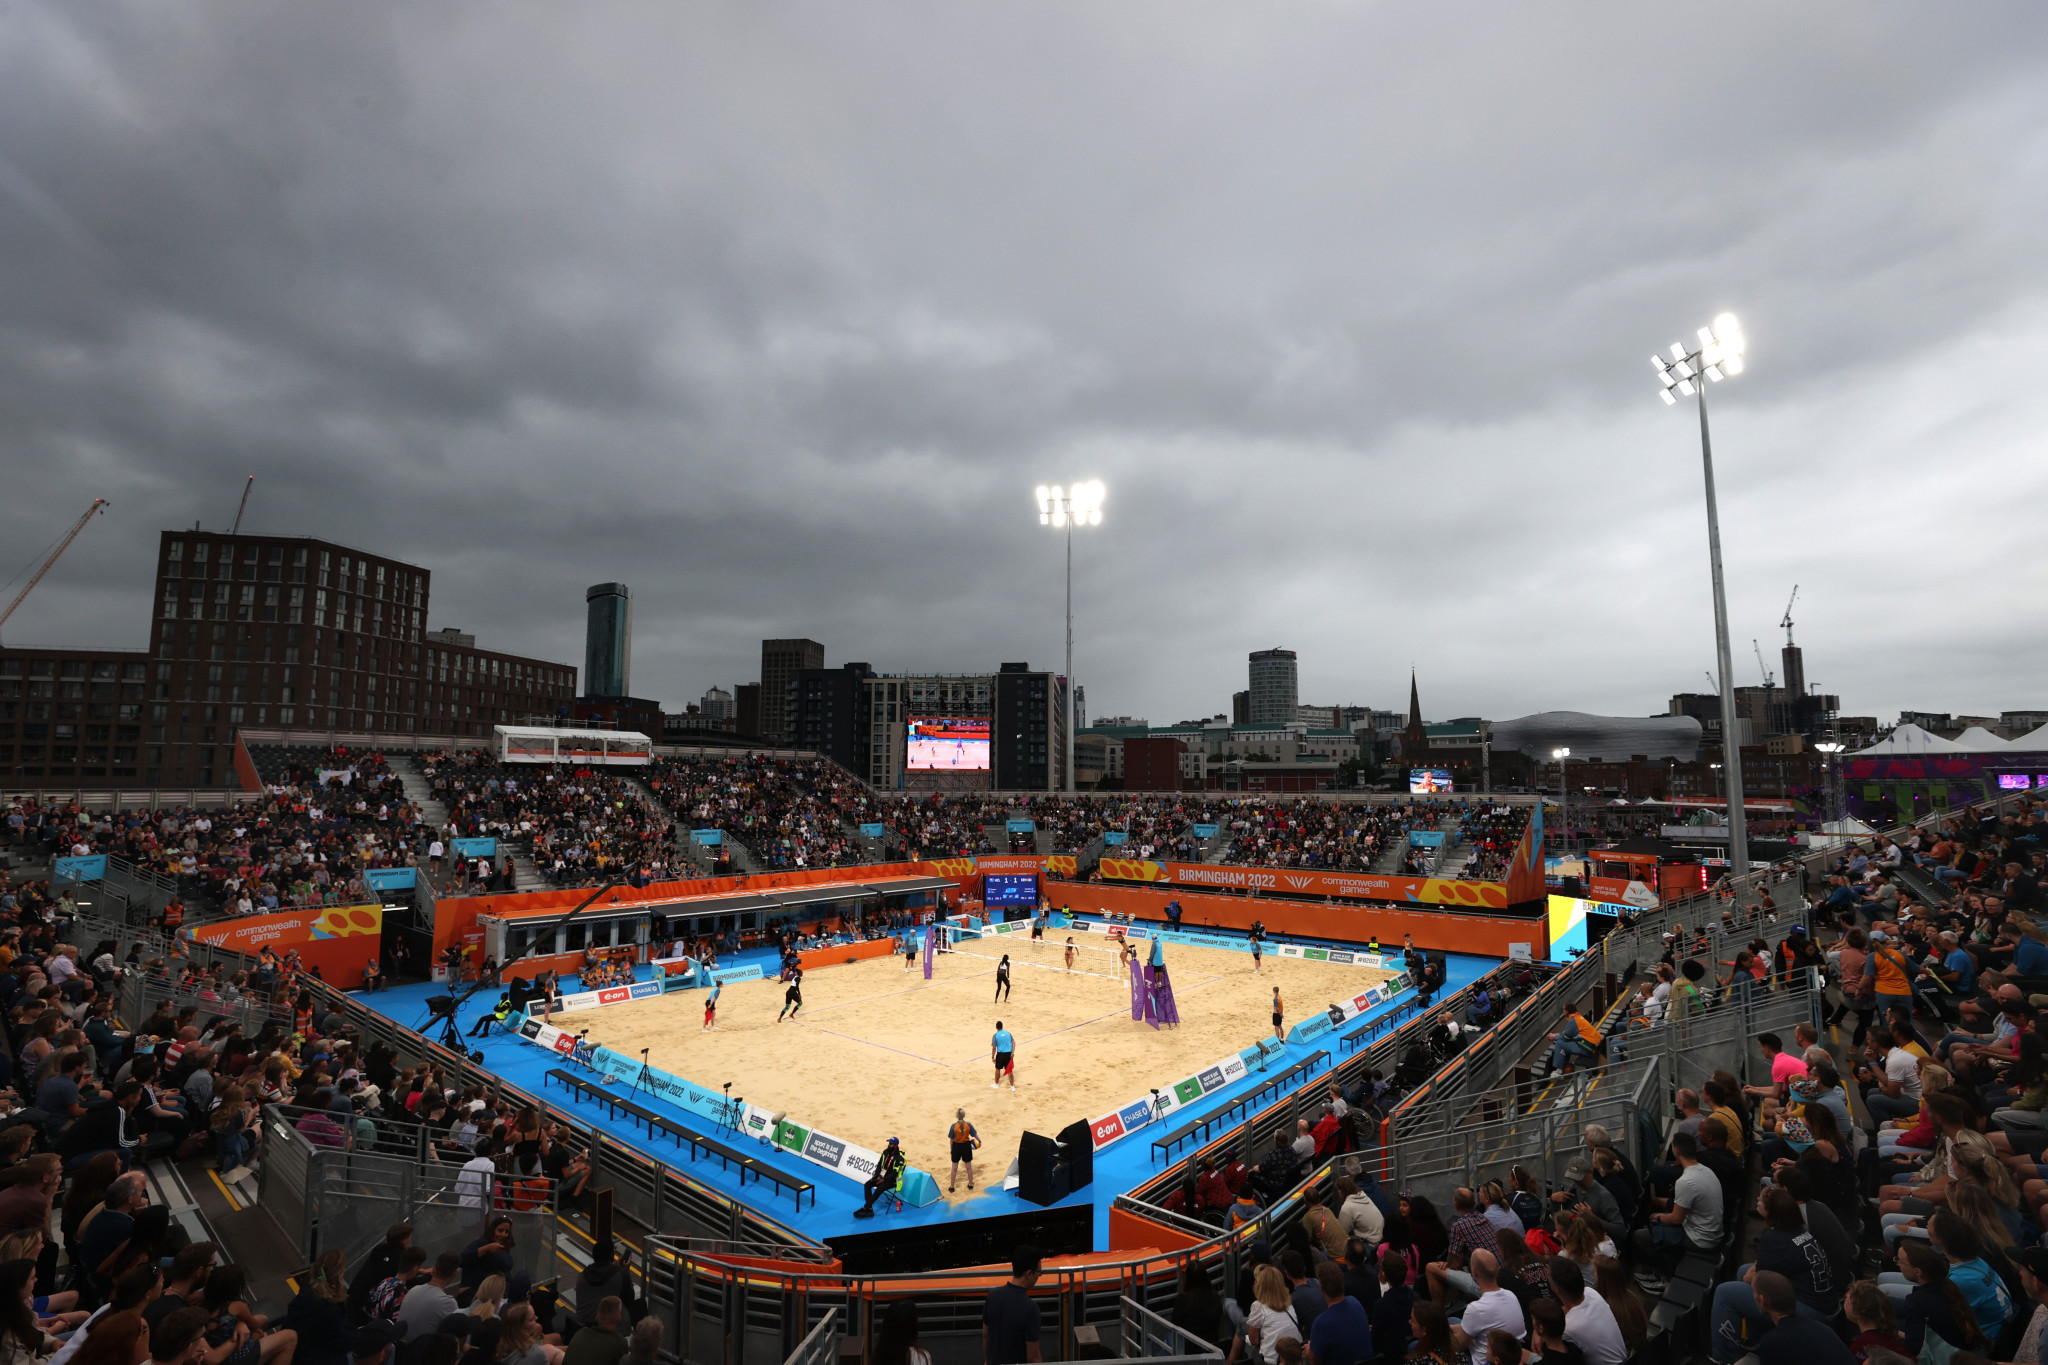 Beach volleyball started today in Smithfield ©Getty Images